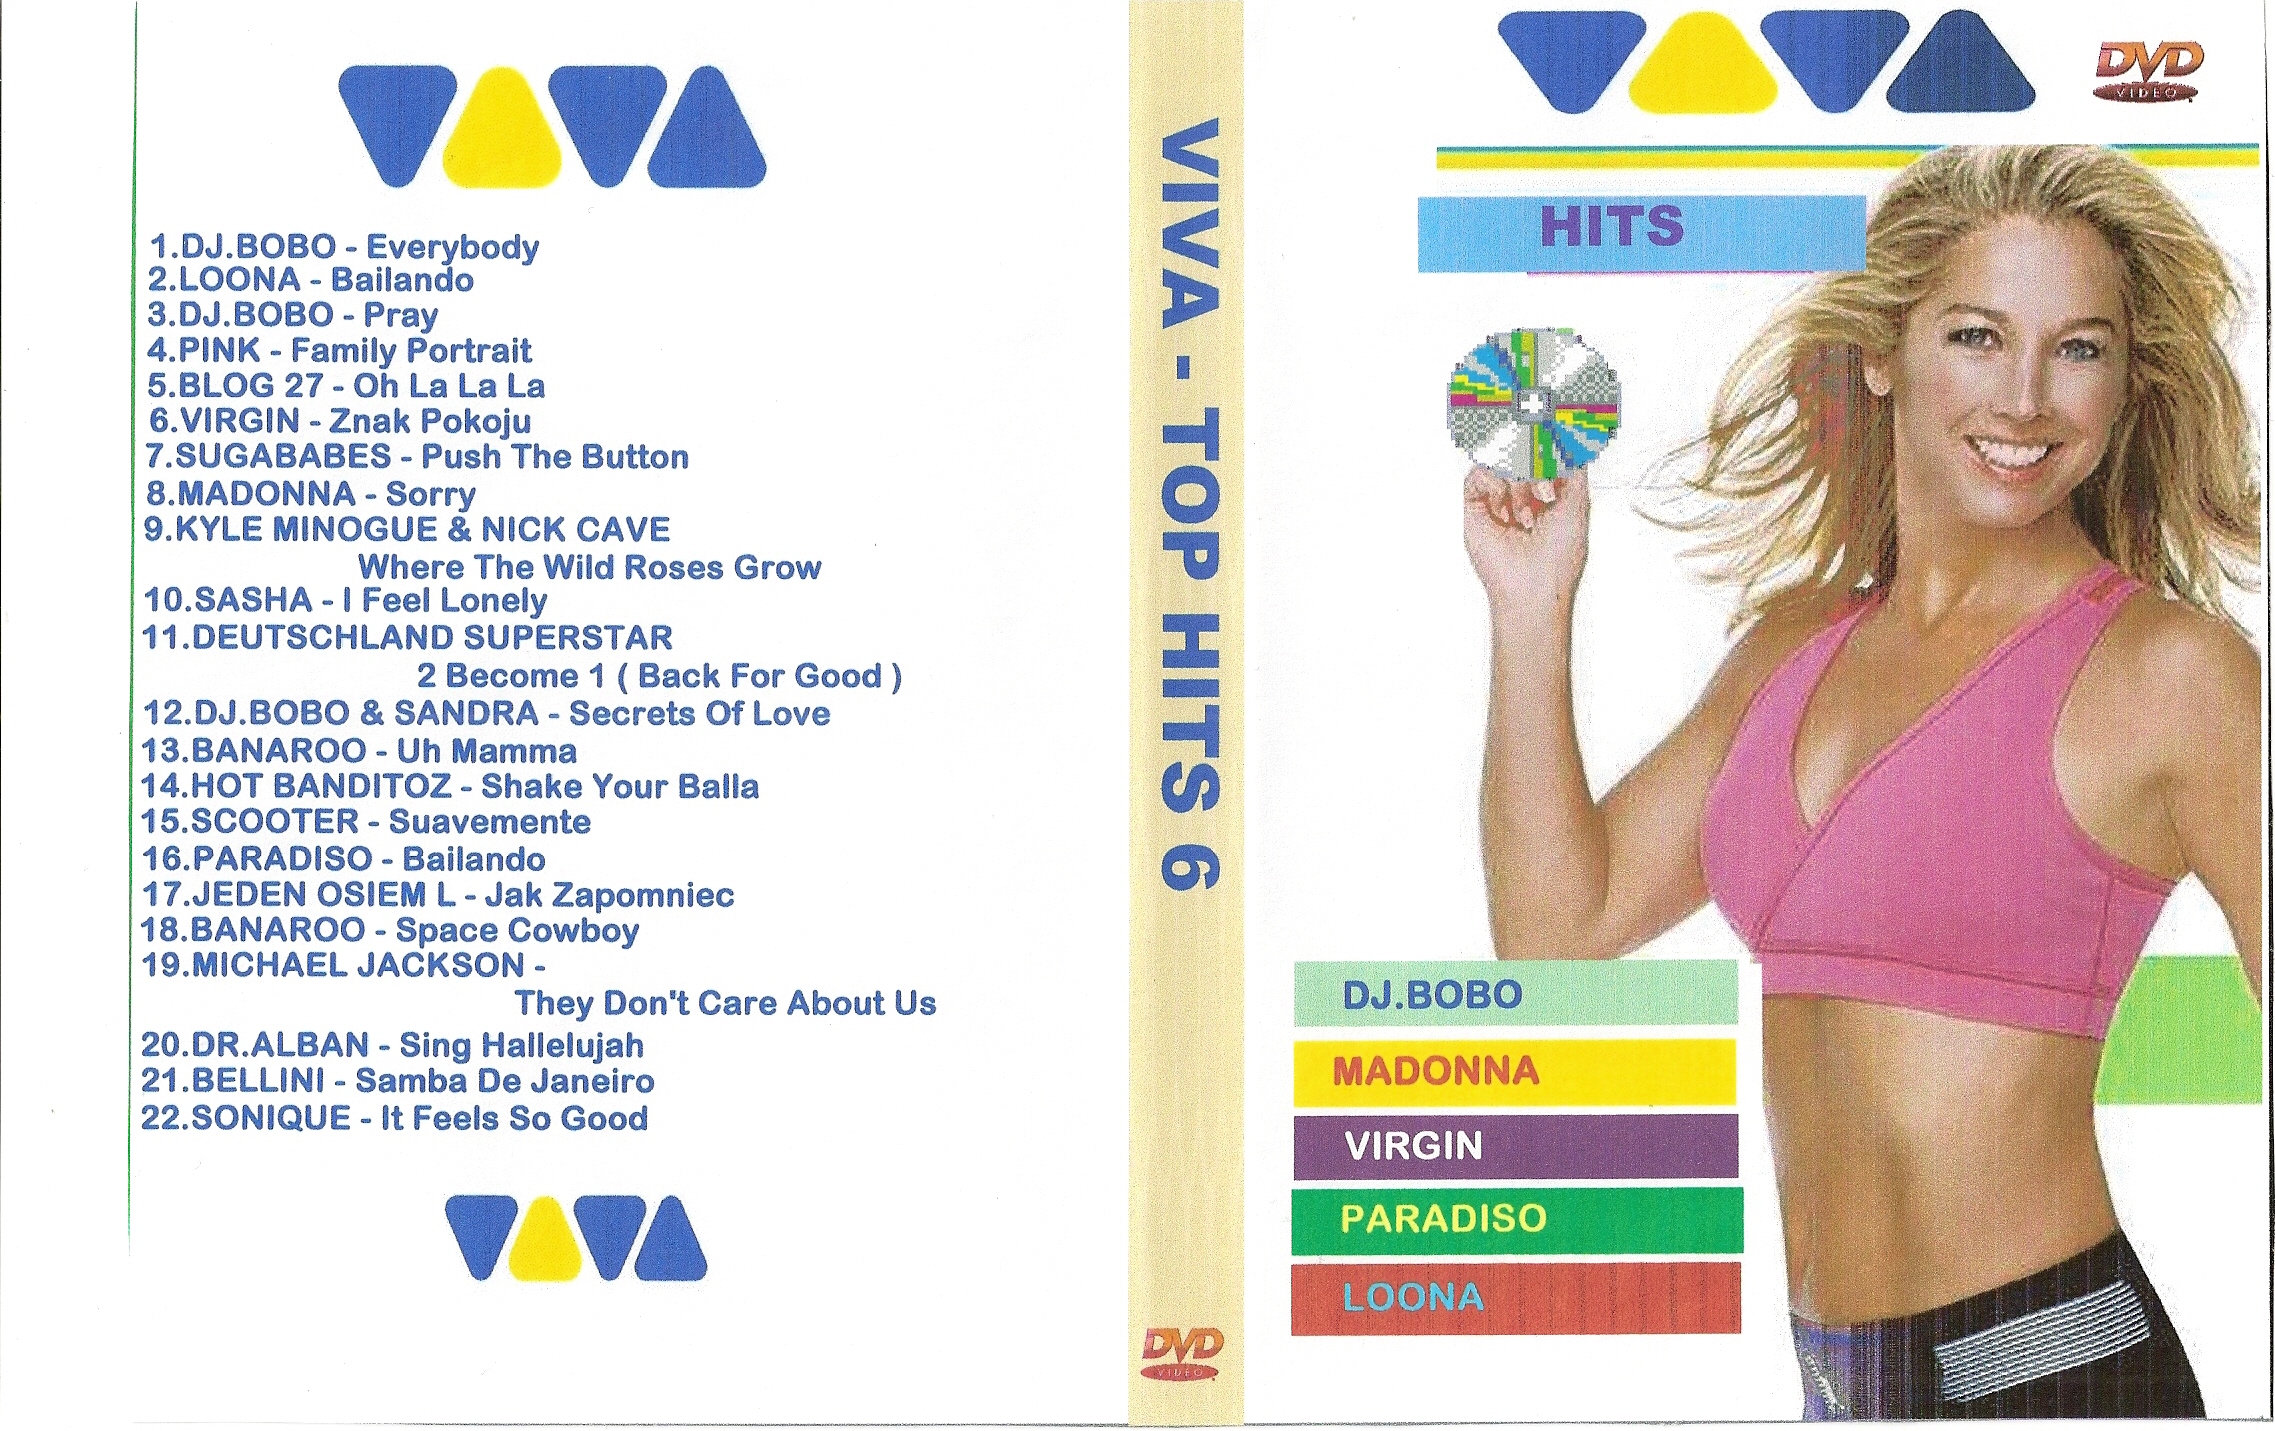 Private Collection DVD oraz cale płyty1 - VIVA - Top Hits 6.jpg